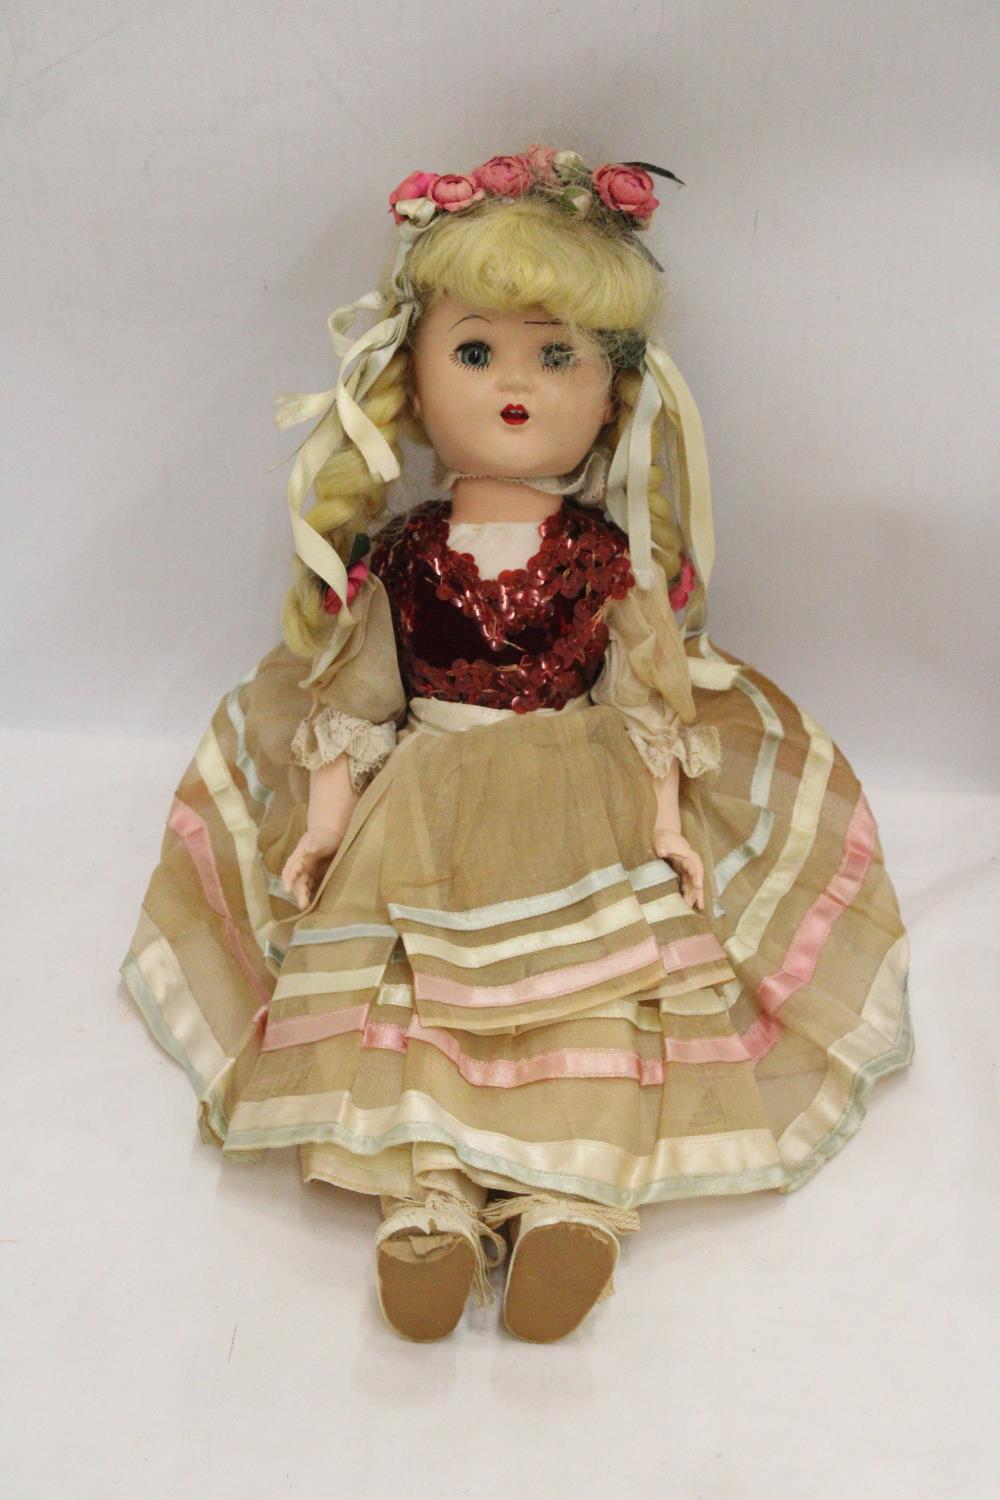 A VINTAGE DOLL WITH ORIGINAL COSTUME AND SLEEPY EYES